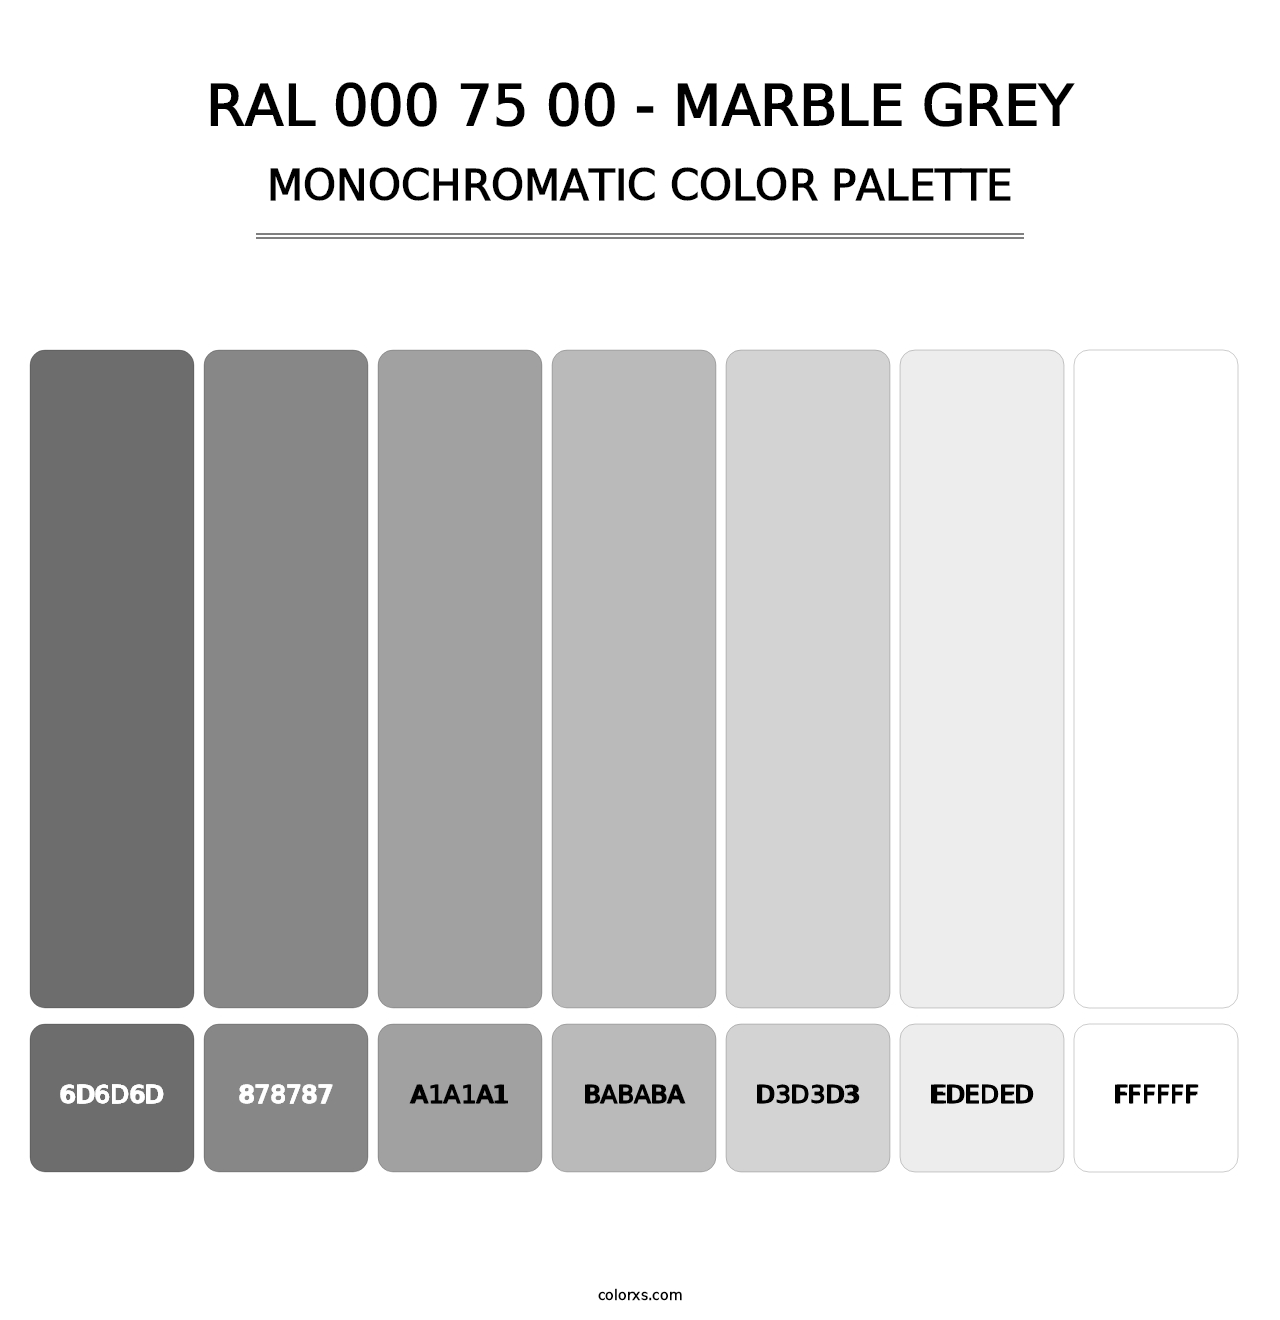 RAL 000 75 00 - Marble Grey - Monochromatic Color Palette